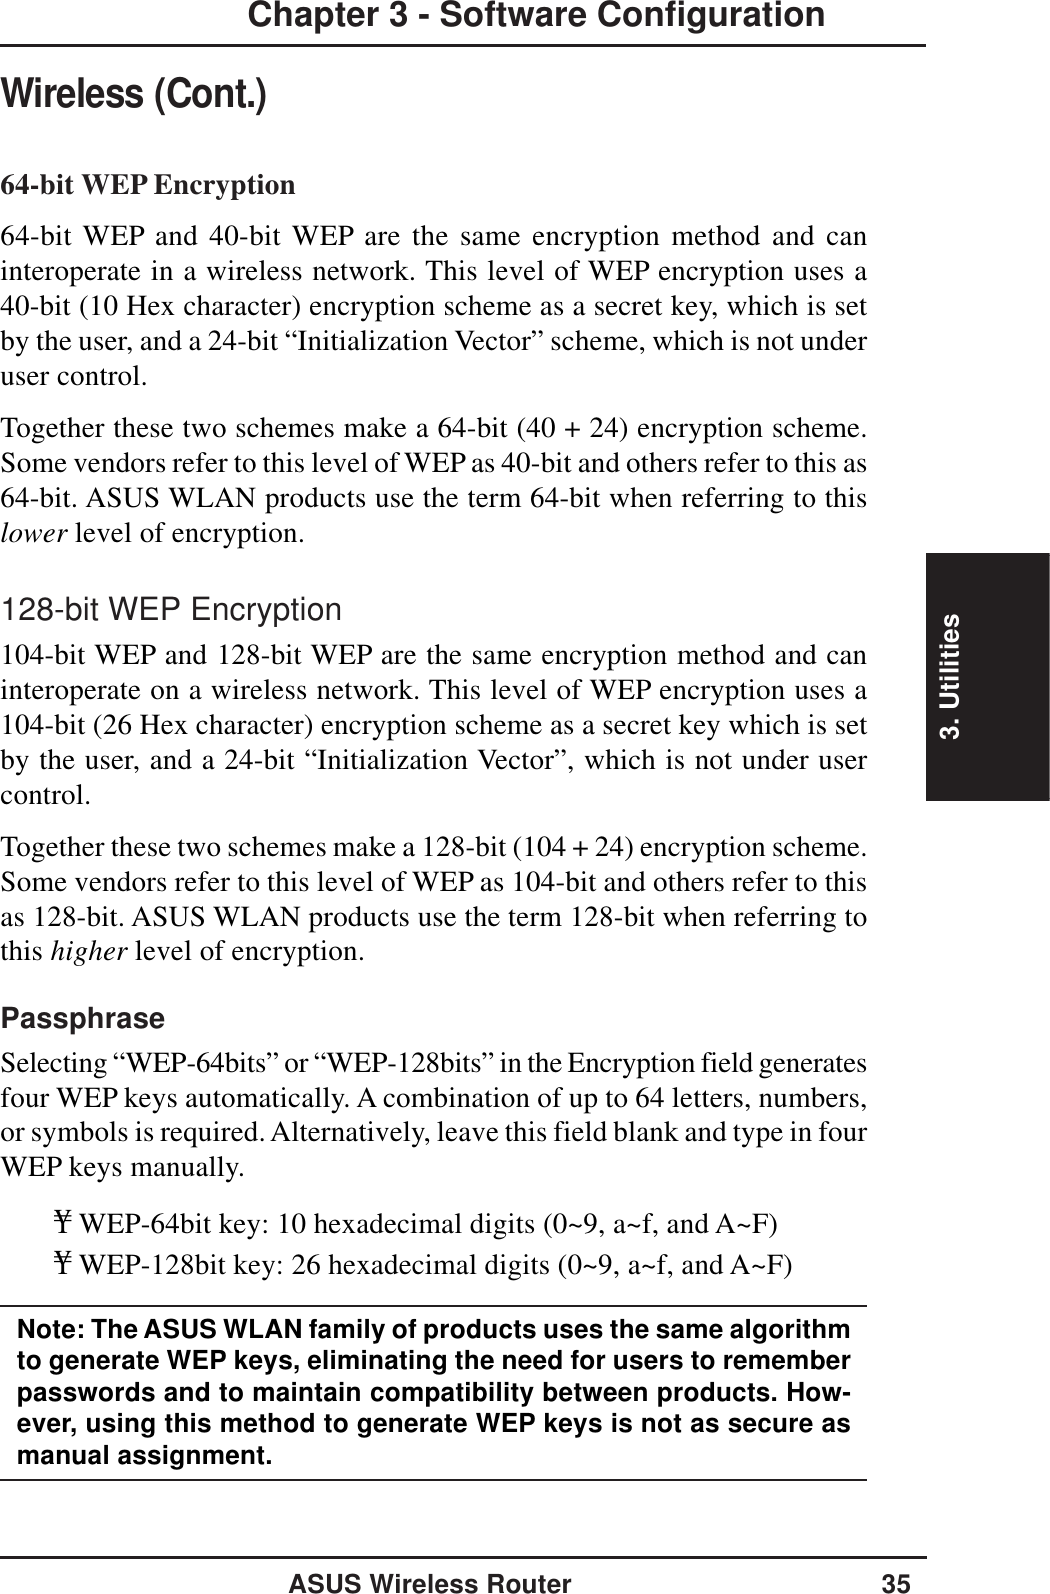 3. UtilitiesASUS Wireless Router 35Chapter 3 - Software ConfigurationWireless (Cont.)64-bit WEP Encryption64-bit WEP and 40-bit WEP are the same encryption method and caninteroperate in a wireless network. This level of WEP encryption uses a40-bit (10 Hex character) encryption scheme as a secret key, which is setby the user, and a 24-bit “Initialization Vector” scheme, which is not underuser control.Together these two schemes make a 64-bit (40 + 24) encryption scheme.Some vendors refer to this level of WEP as 40-bit and others refer to this as64-bit. ASUS WLAN products use the term 64-bit when referring to thislower level of encryption.128-bit WEP Encryption104-bit WEP and 128-bit WEP are the same encryption method and caninteroperate on a wireless network. This level of WEP encryption uses a104-bit (26 Hex character) encryption scheme as a secret key which is setby the user, and a 24-bit “Initialization Vector”, which is not under usercontrol.Together these two schemes make a 128-bit (104 + 24) encryption scheme.Some vendors refer to this level of WEP as 104-bit and others refer to thisas 128-bit. ASUS WLAN products use the term 128-bit when referring tothis higher level of encryption.PassphraseSelecting “WEP-64bits” or “WEP-128bits” in the Encryption field generatesfour WEP keys automatically. A combination of up to 64 letters, numbers,or symbols is required. Alternatively, leave this field blank and type in fourWEP keys manually.¥WEP-64bit key: 10 hexadecimal digits (0~9, a~f, and A~F)¥WEP-128bit key: 26 hexadecimal digits (0~9, a~f, and A~F)Note: The ASUS WLAN family of products uses the same algorithmto generate WEP keys, eliminating the need for users to rememberpasswords and to maintain compatibility between products. How-ever, using this method to generate WEP keys is not as secure asmanual assignment.